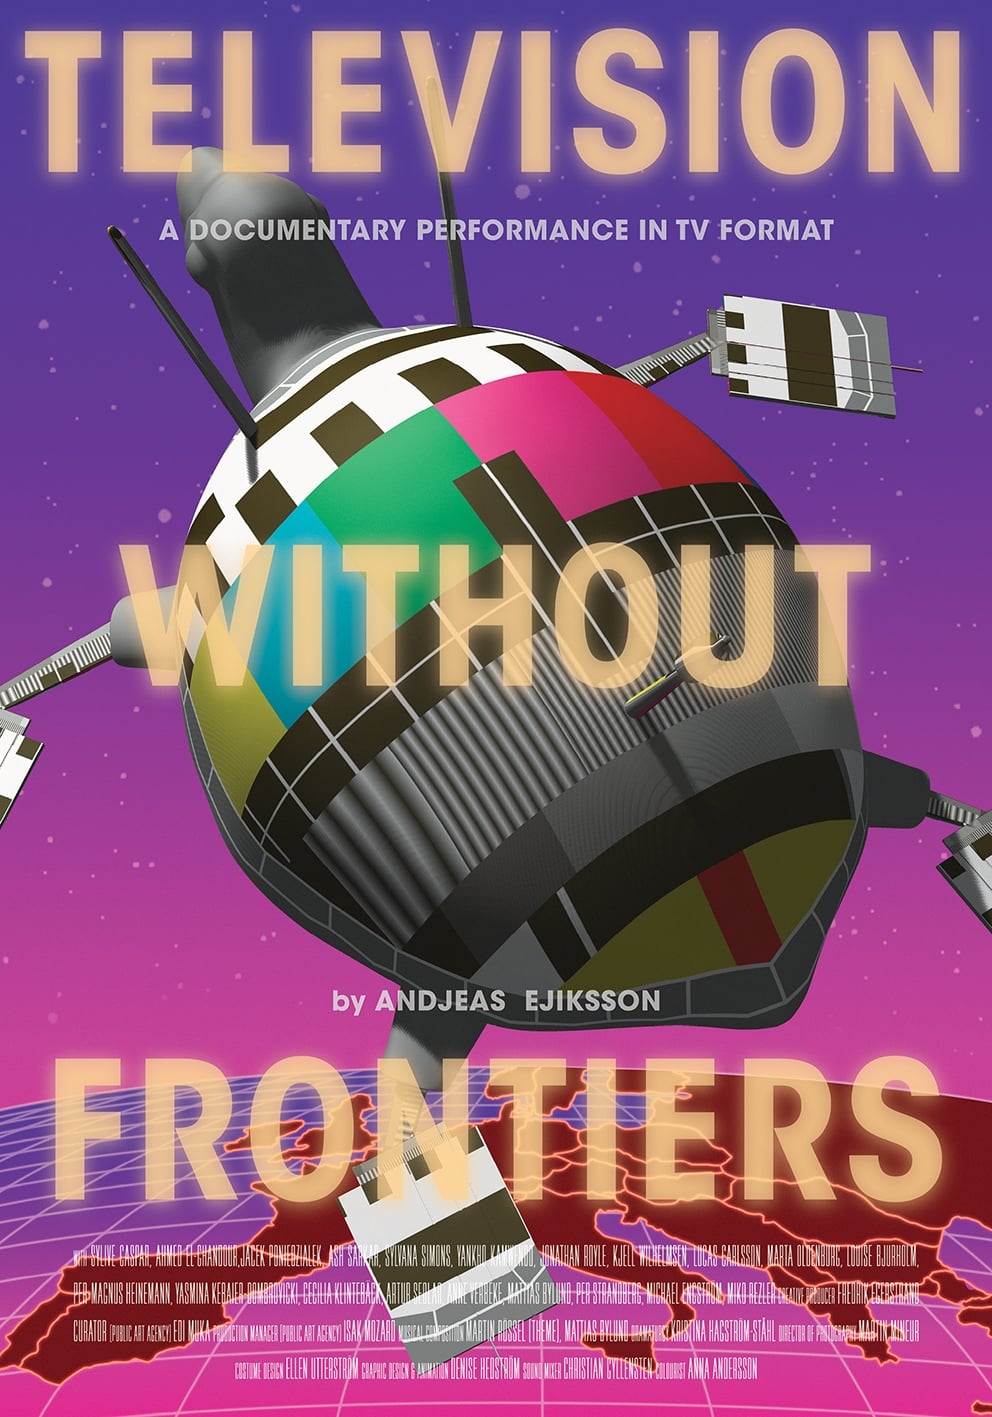 Television Without Frontiers (2019)